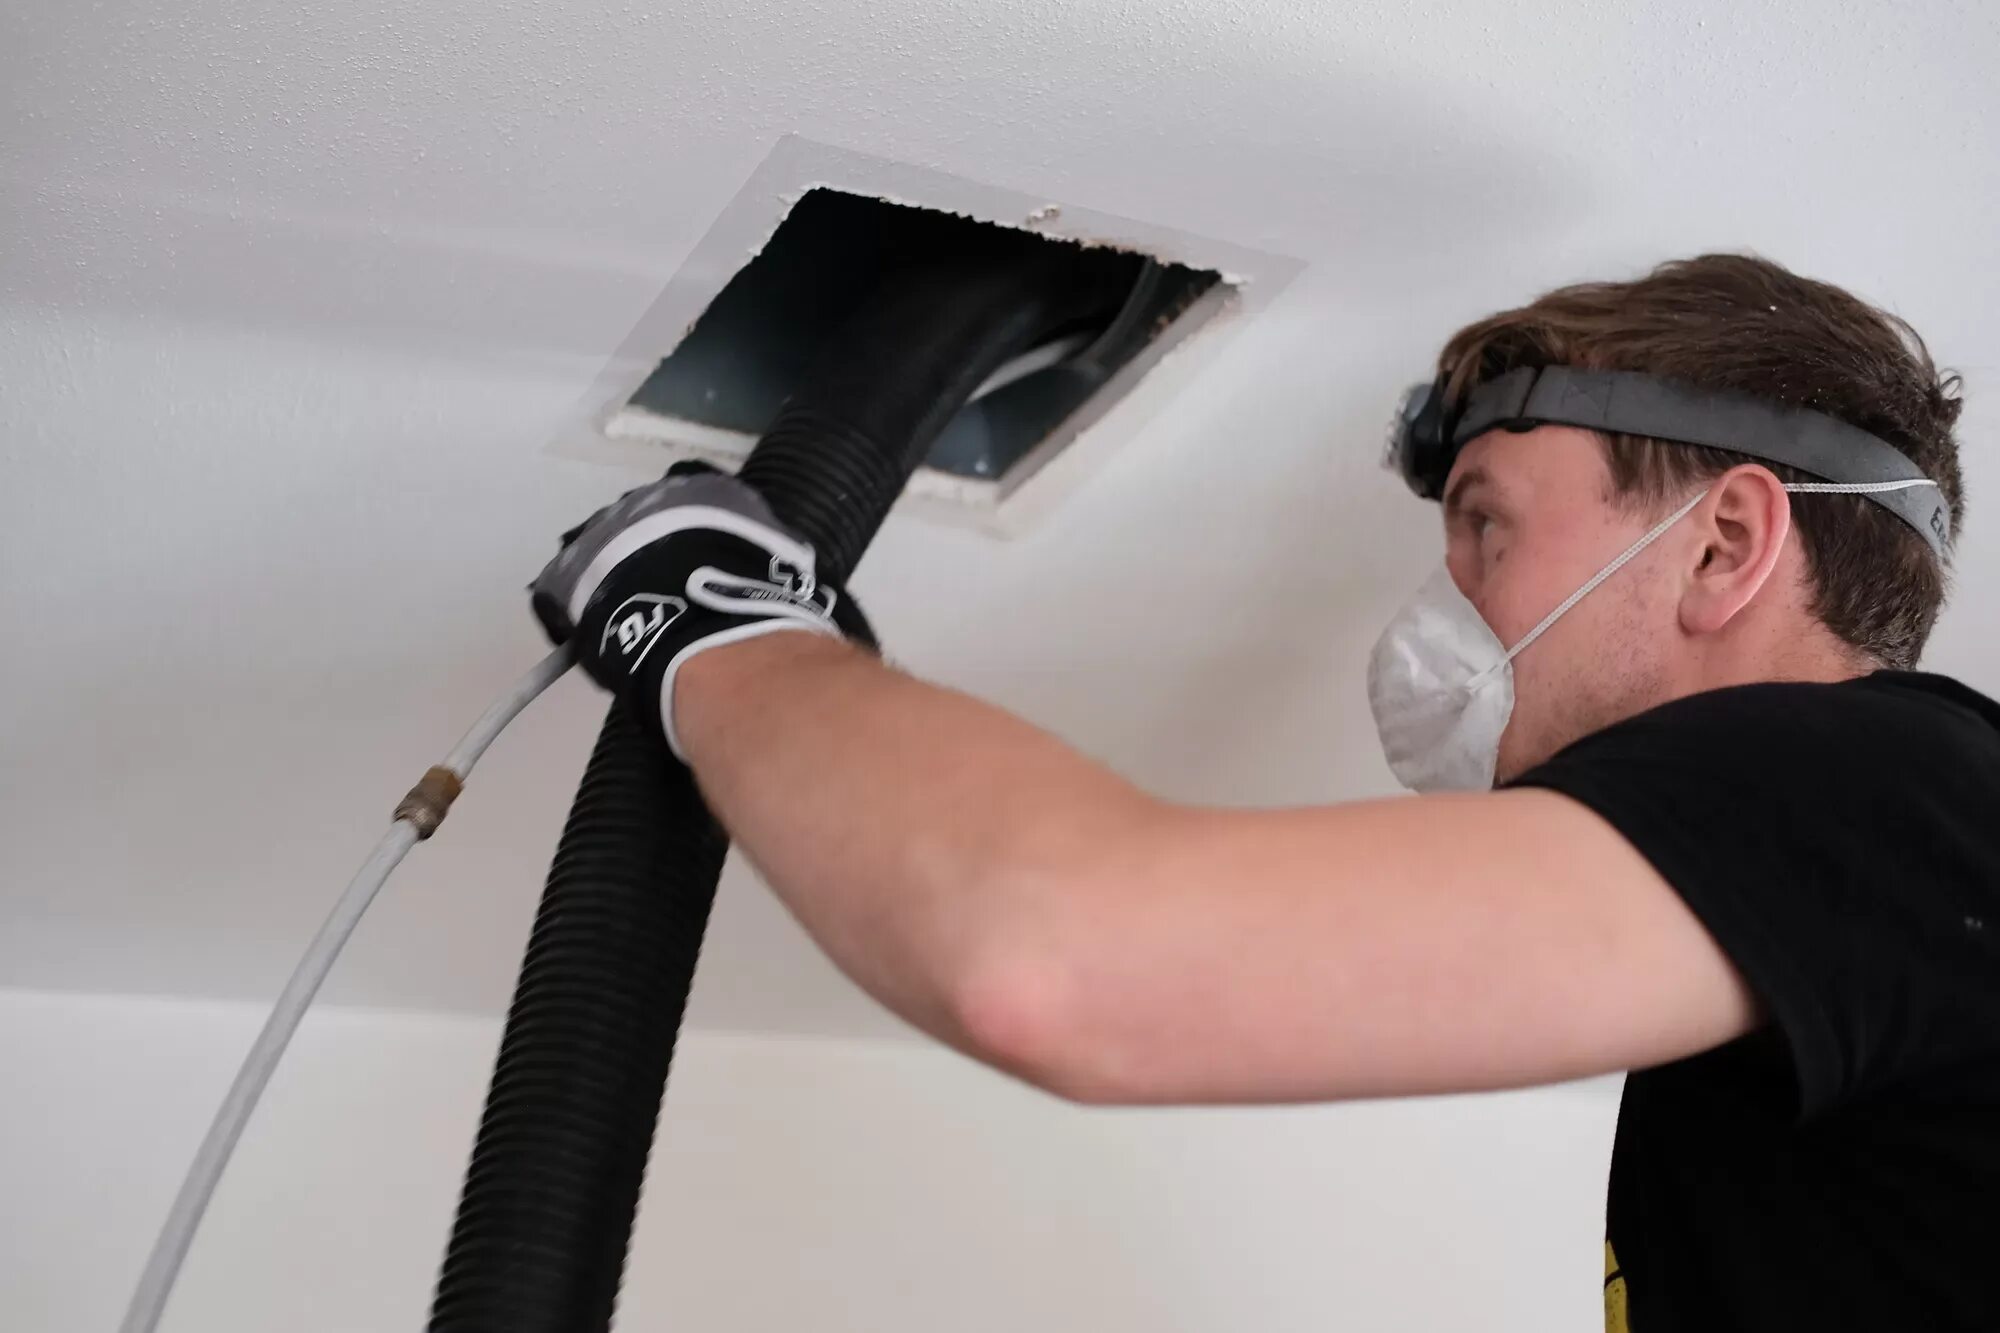 Air Duct Cleaning. Air Duct Cleaning DC. Прочистка вентиляции. Прочистка вентиляции в квартире. Включи прочистку